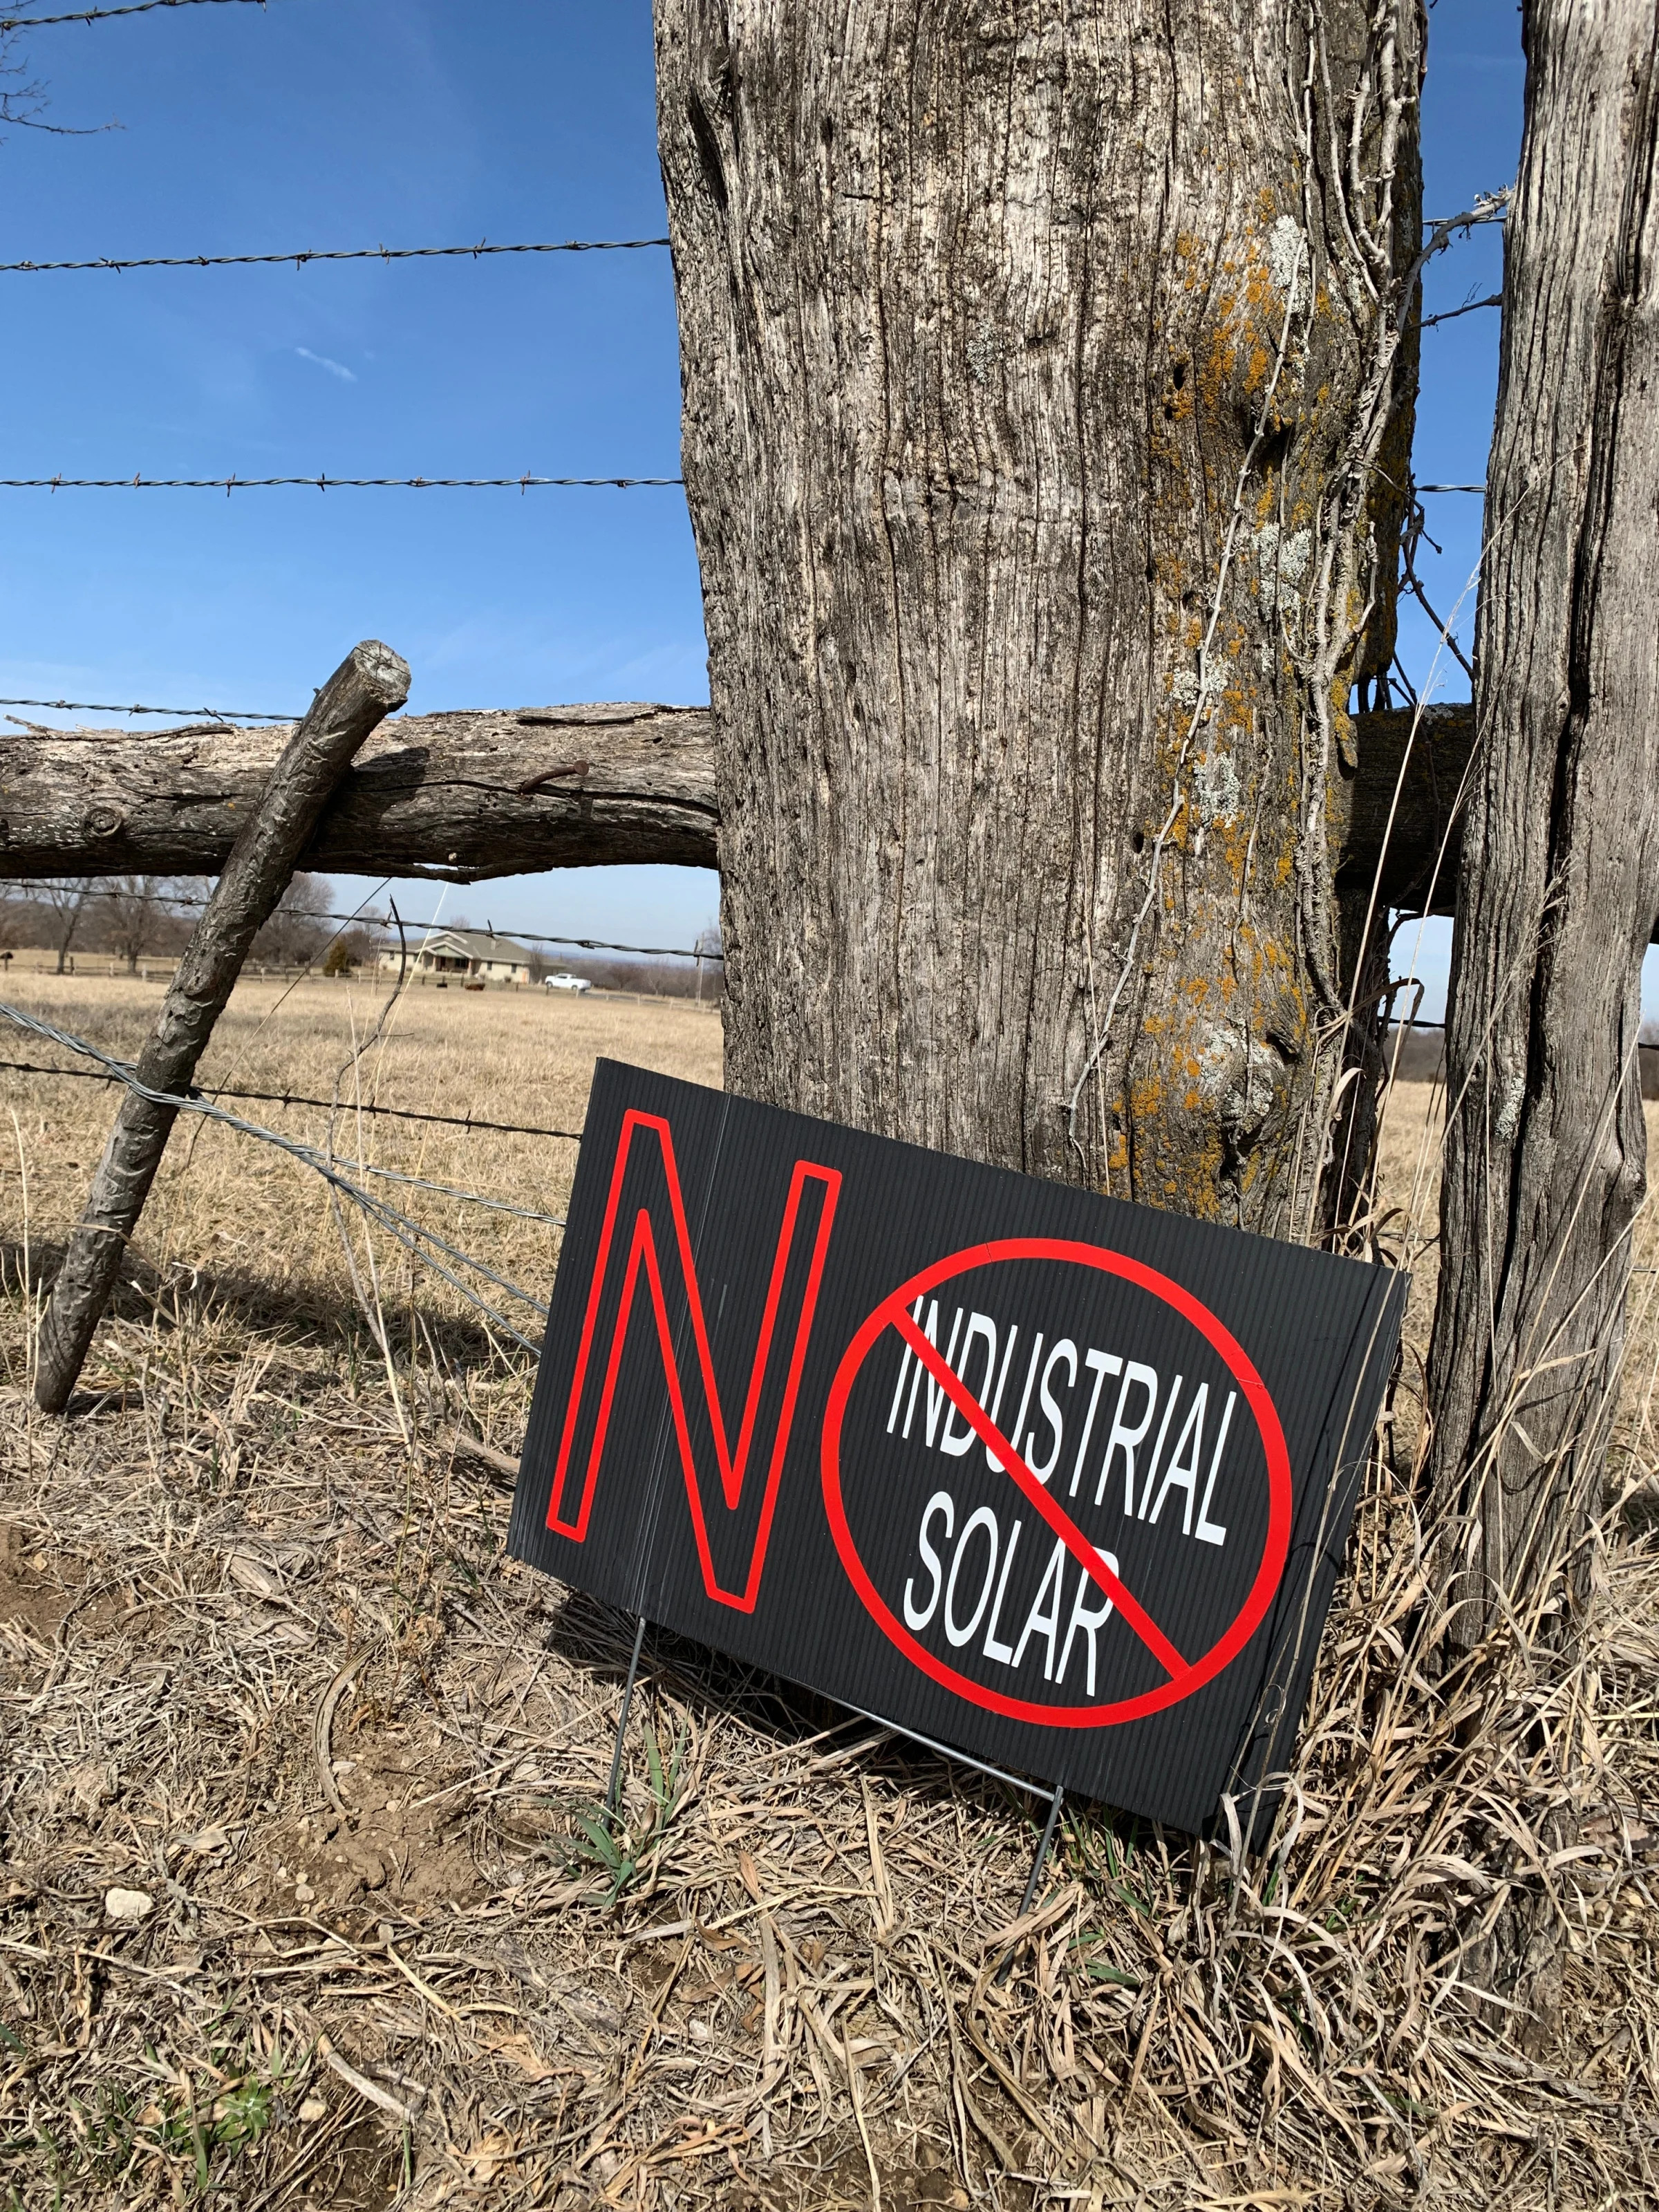 A sign reading No Industrial Solar in Johnson County, Kansas in response to a proposed solar project in the county. February 24, 2023